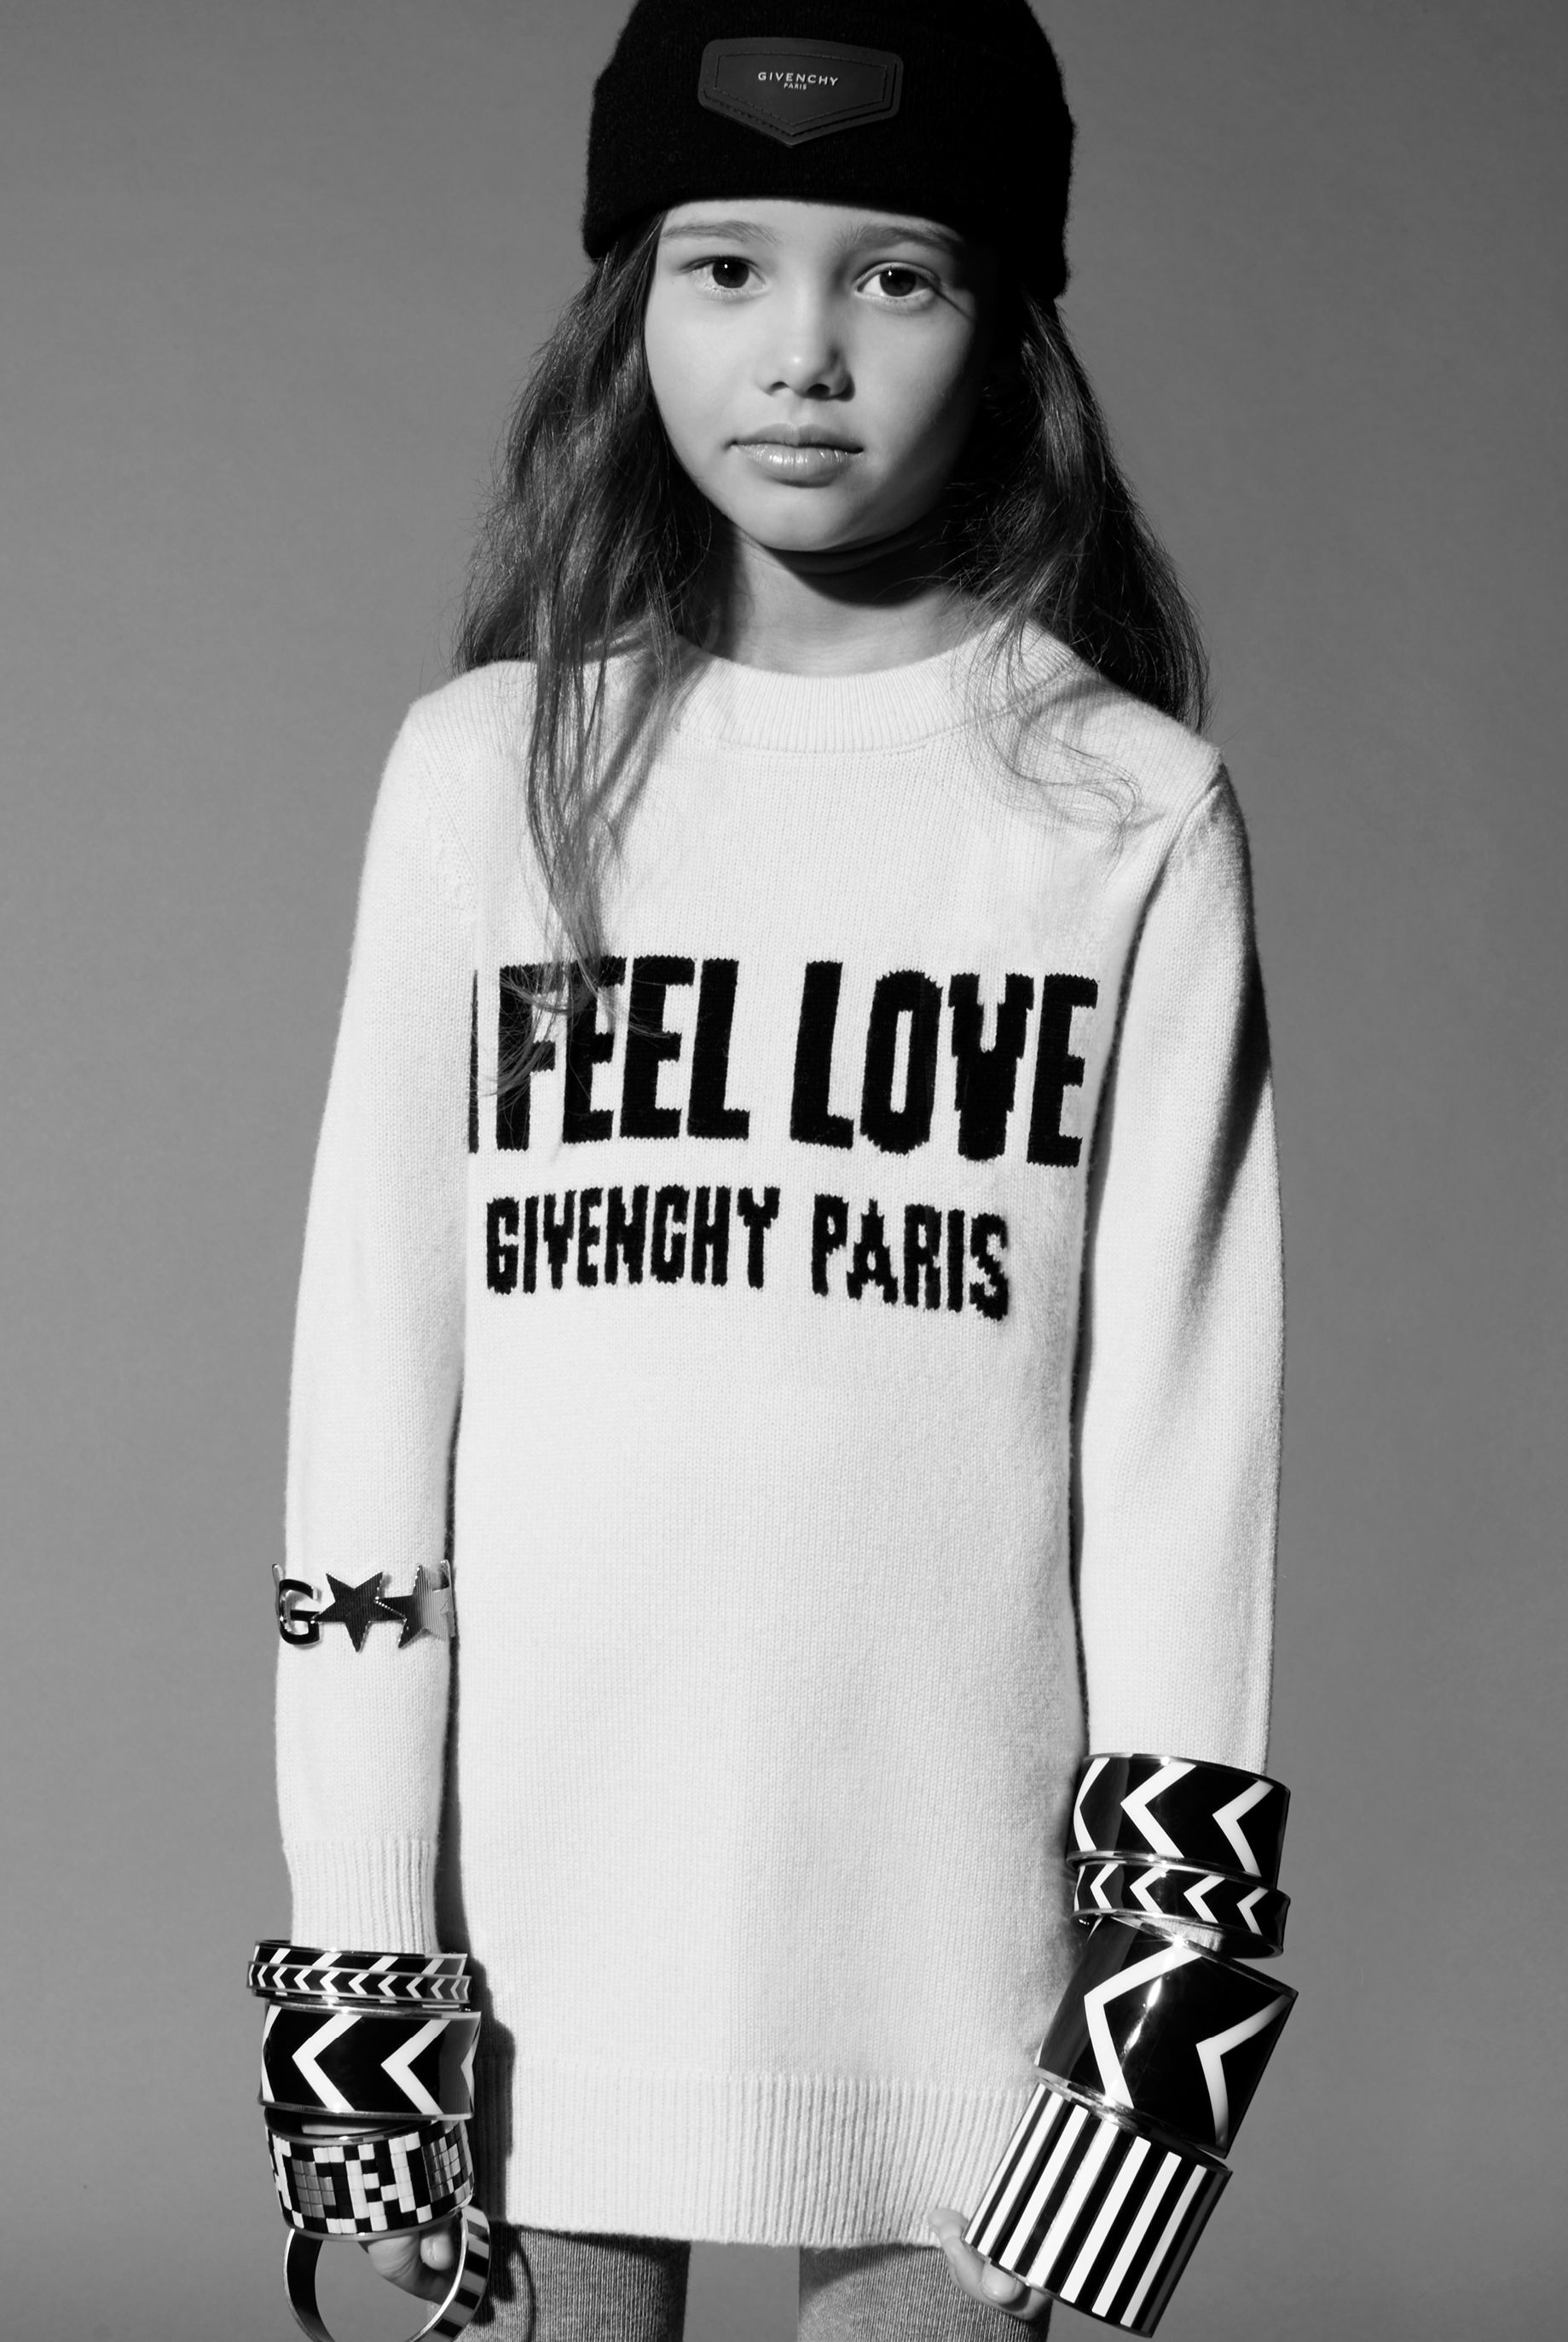 givenchy kids clothes